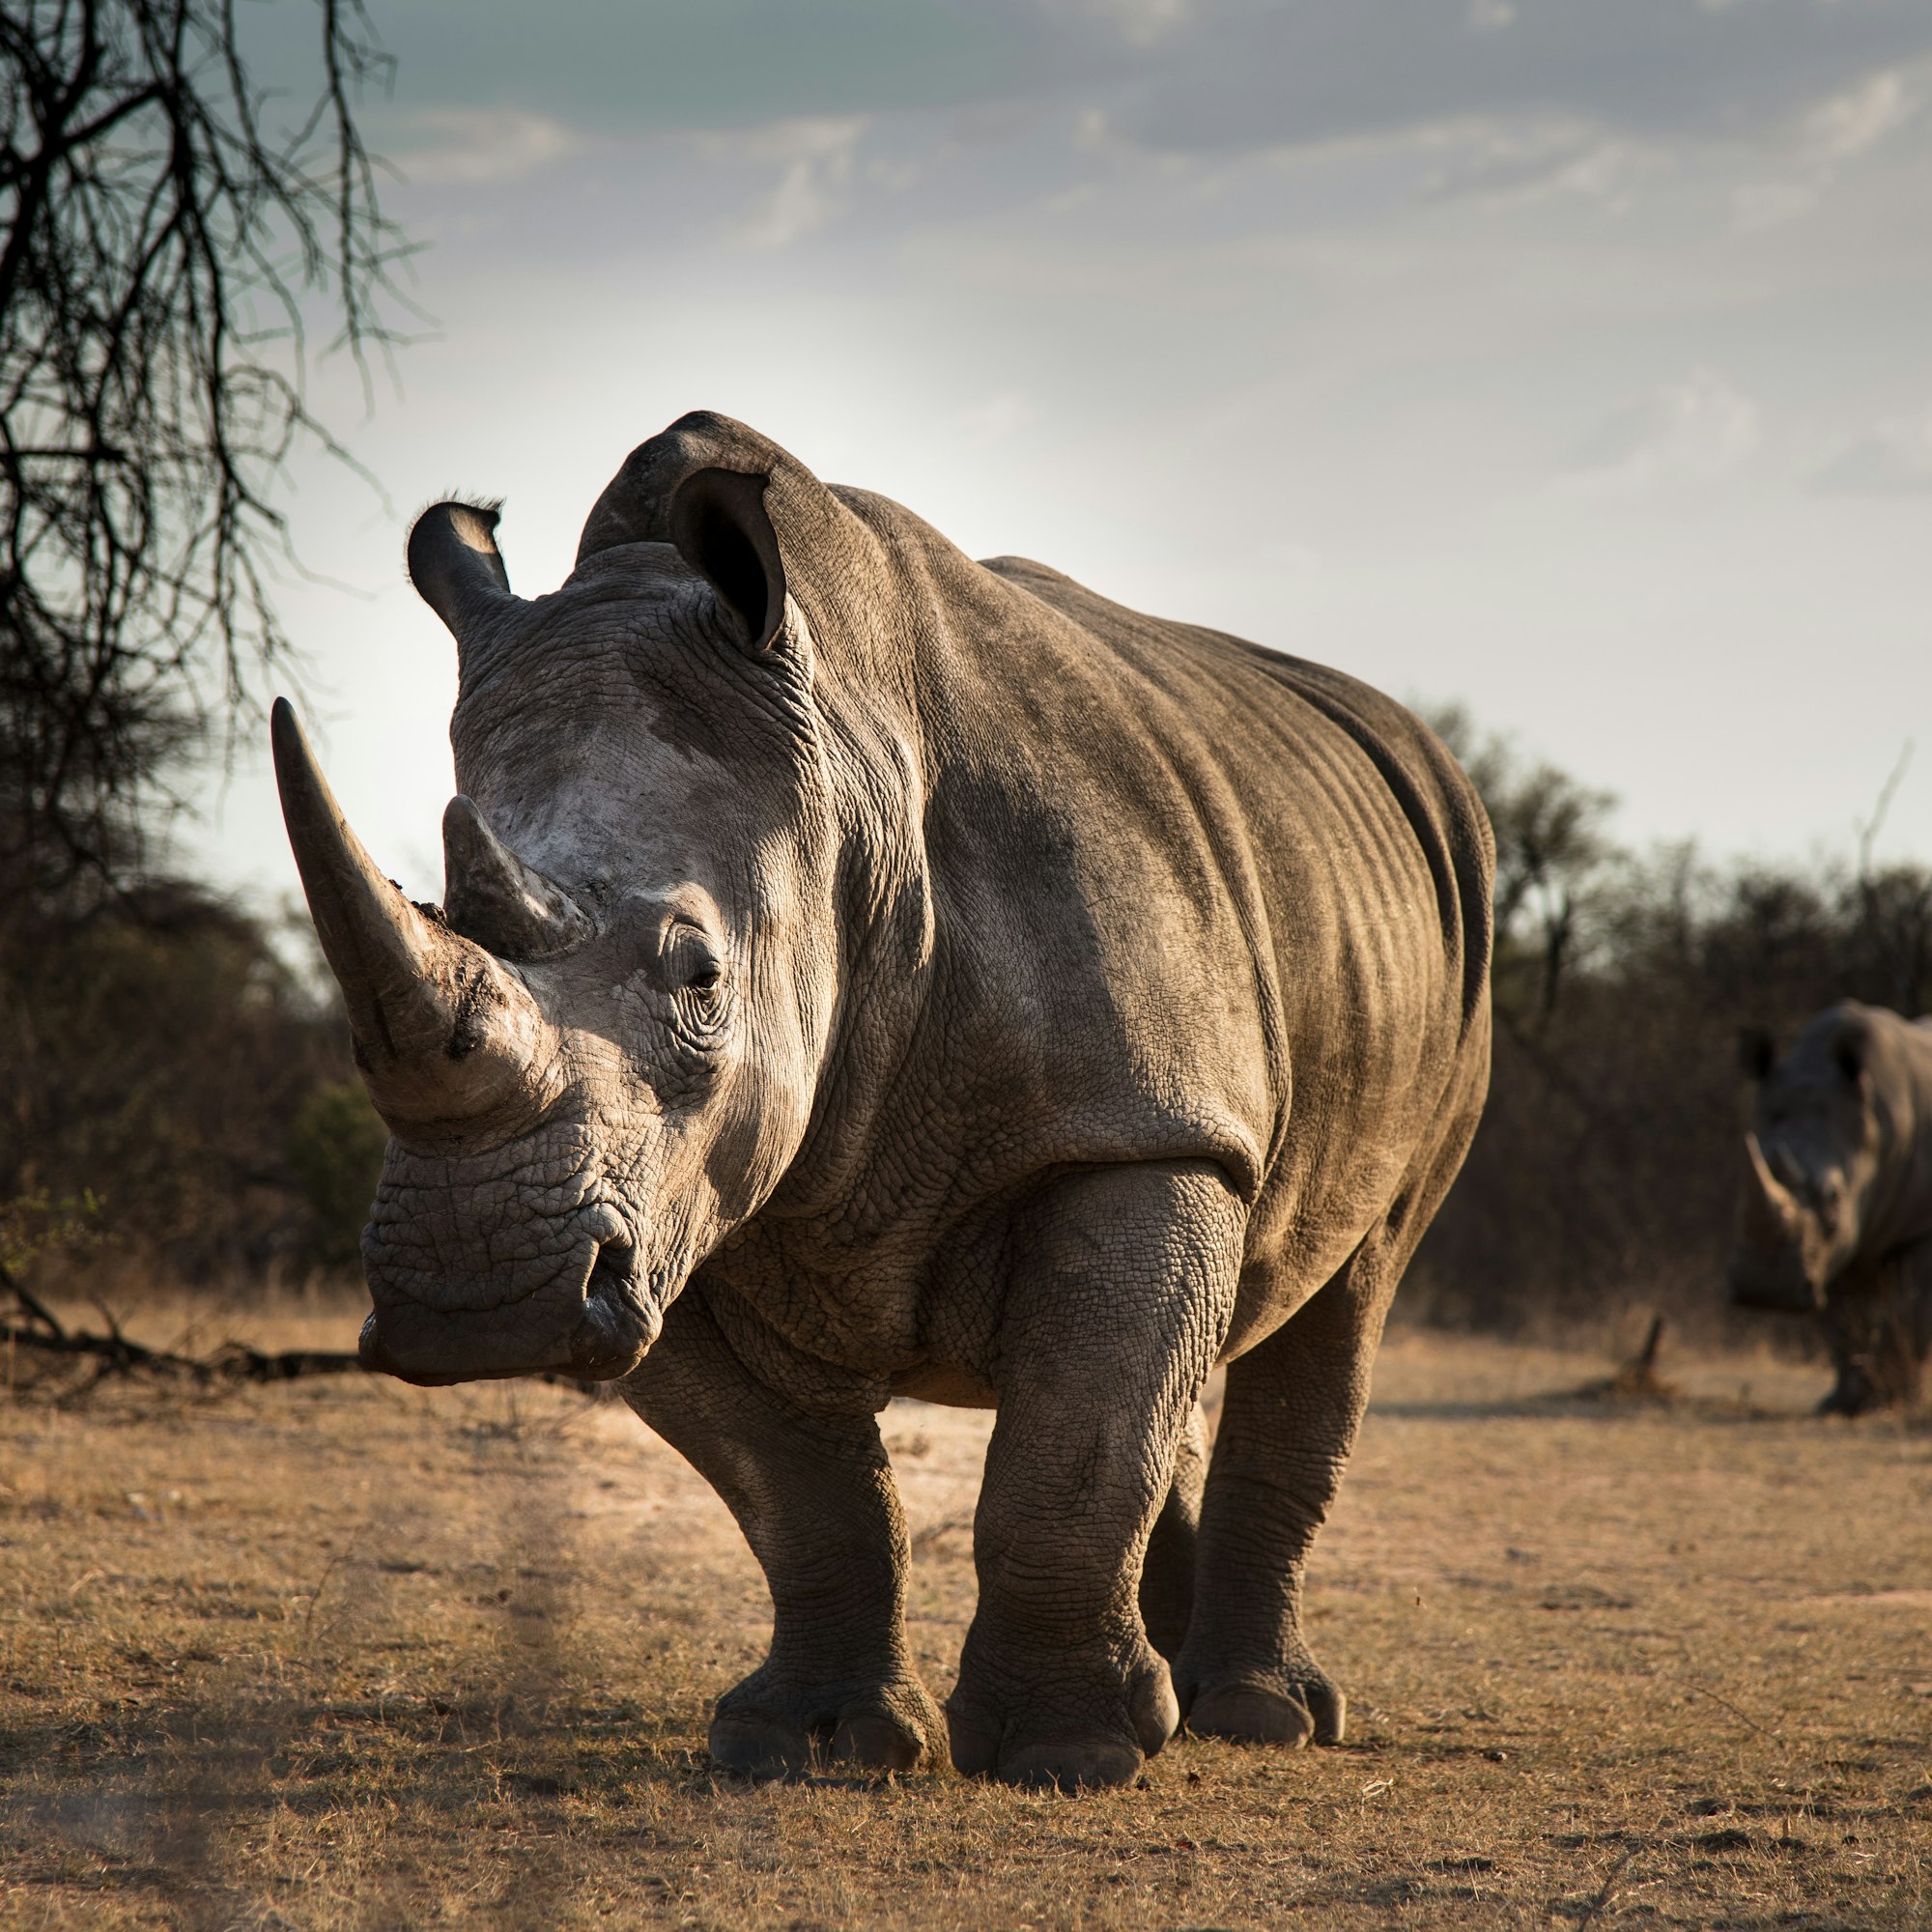 White Rhinos in the South African veld